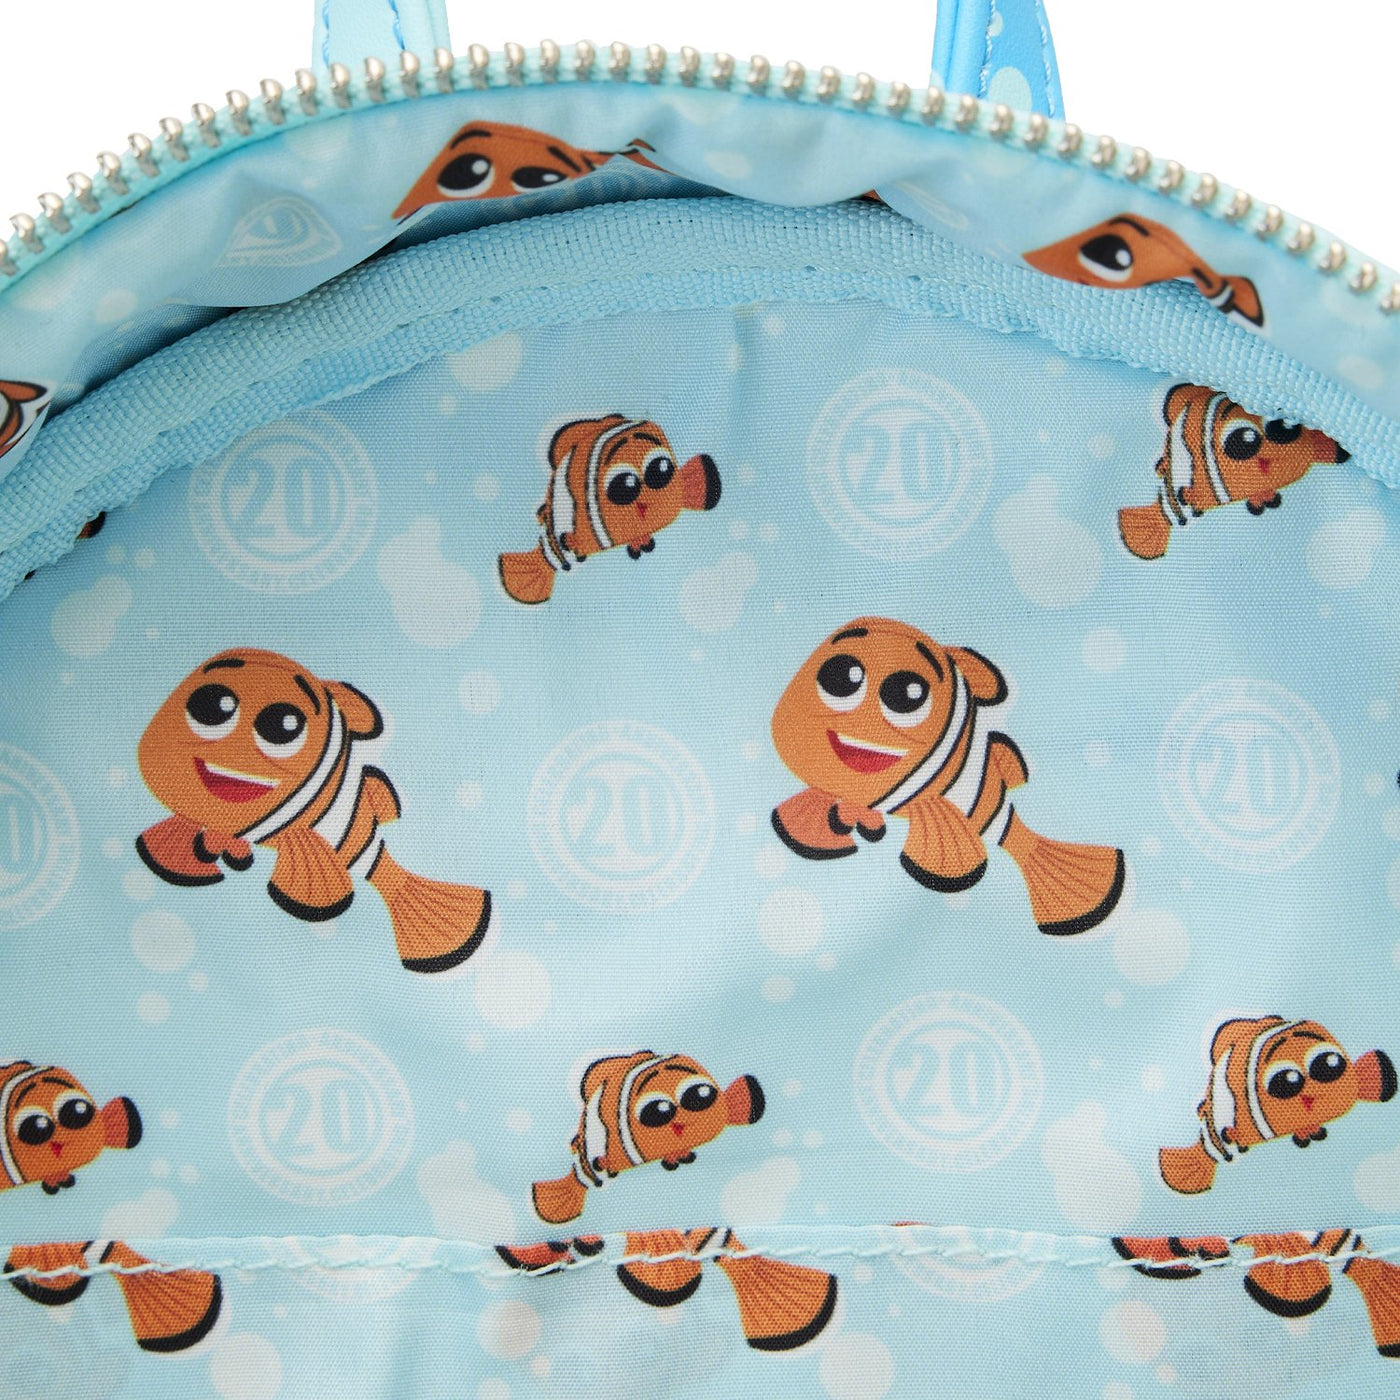 671803451407 - Loungefly Disney Finding Nemo 20th Anniversary Bubble Pockets Mini Backpack - Interior Lining